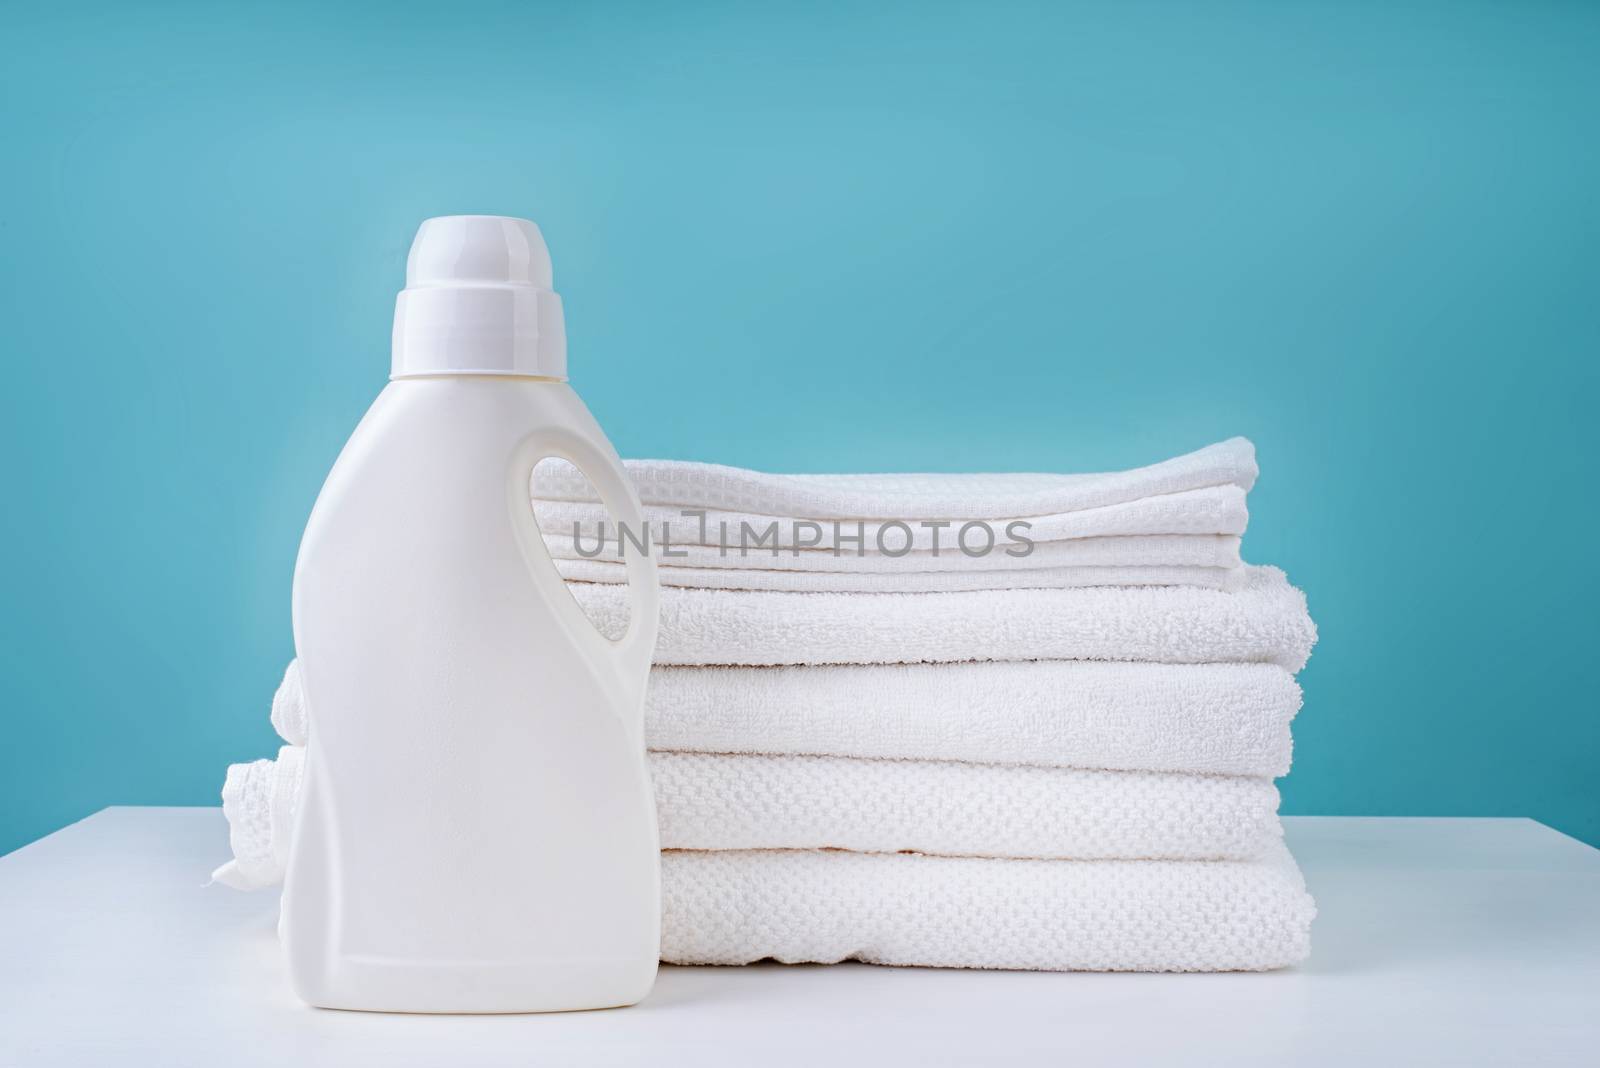 Laundry concept. Stack of clean white towels and a bottle of detergent on blue background with copy space